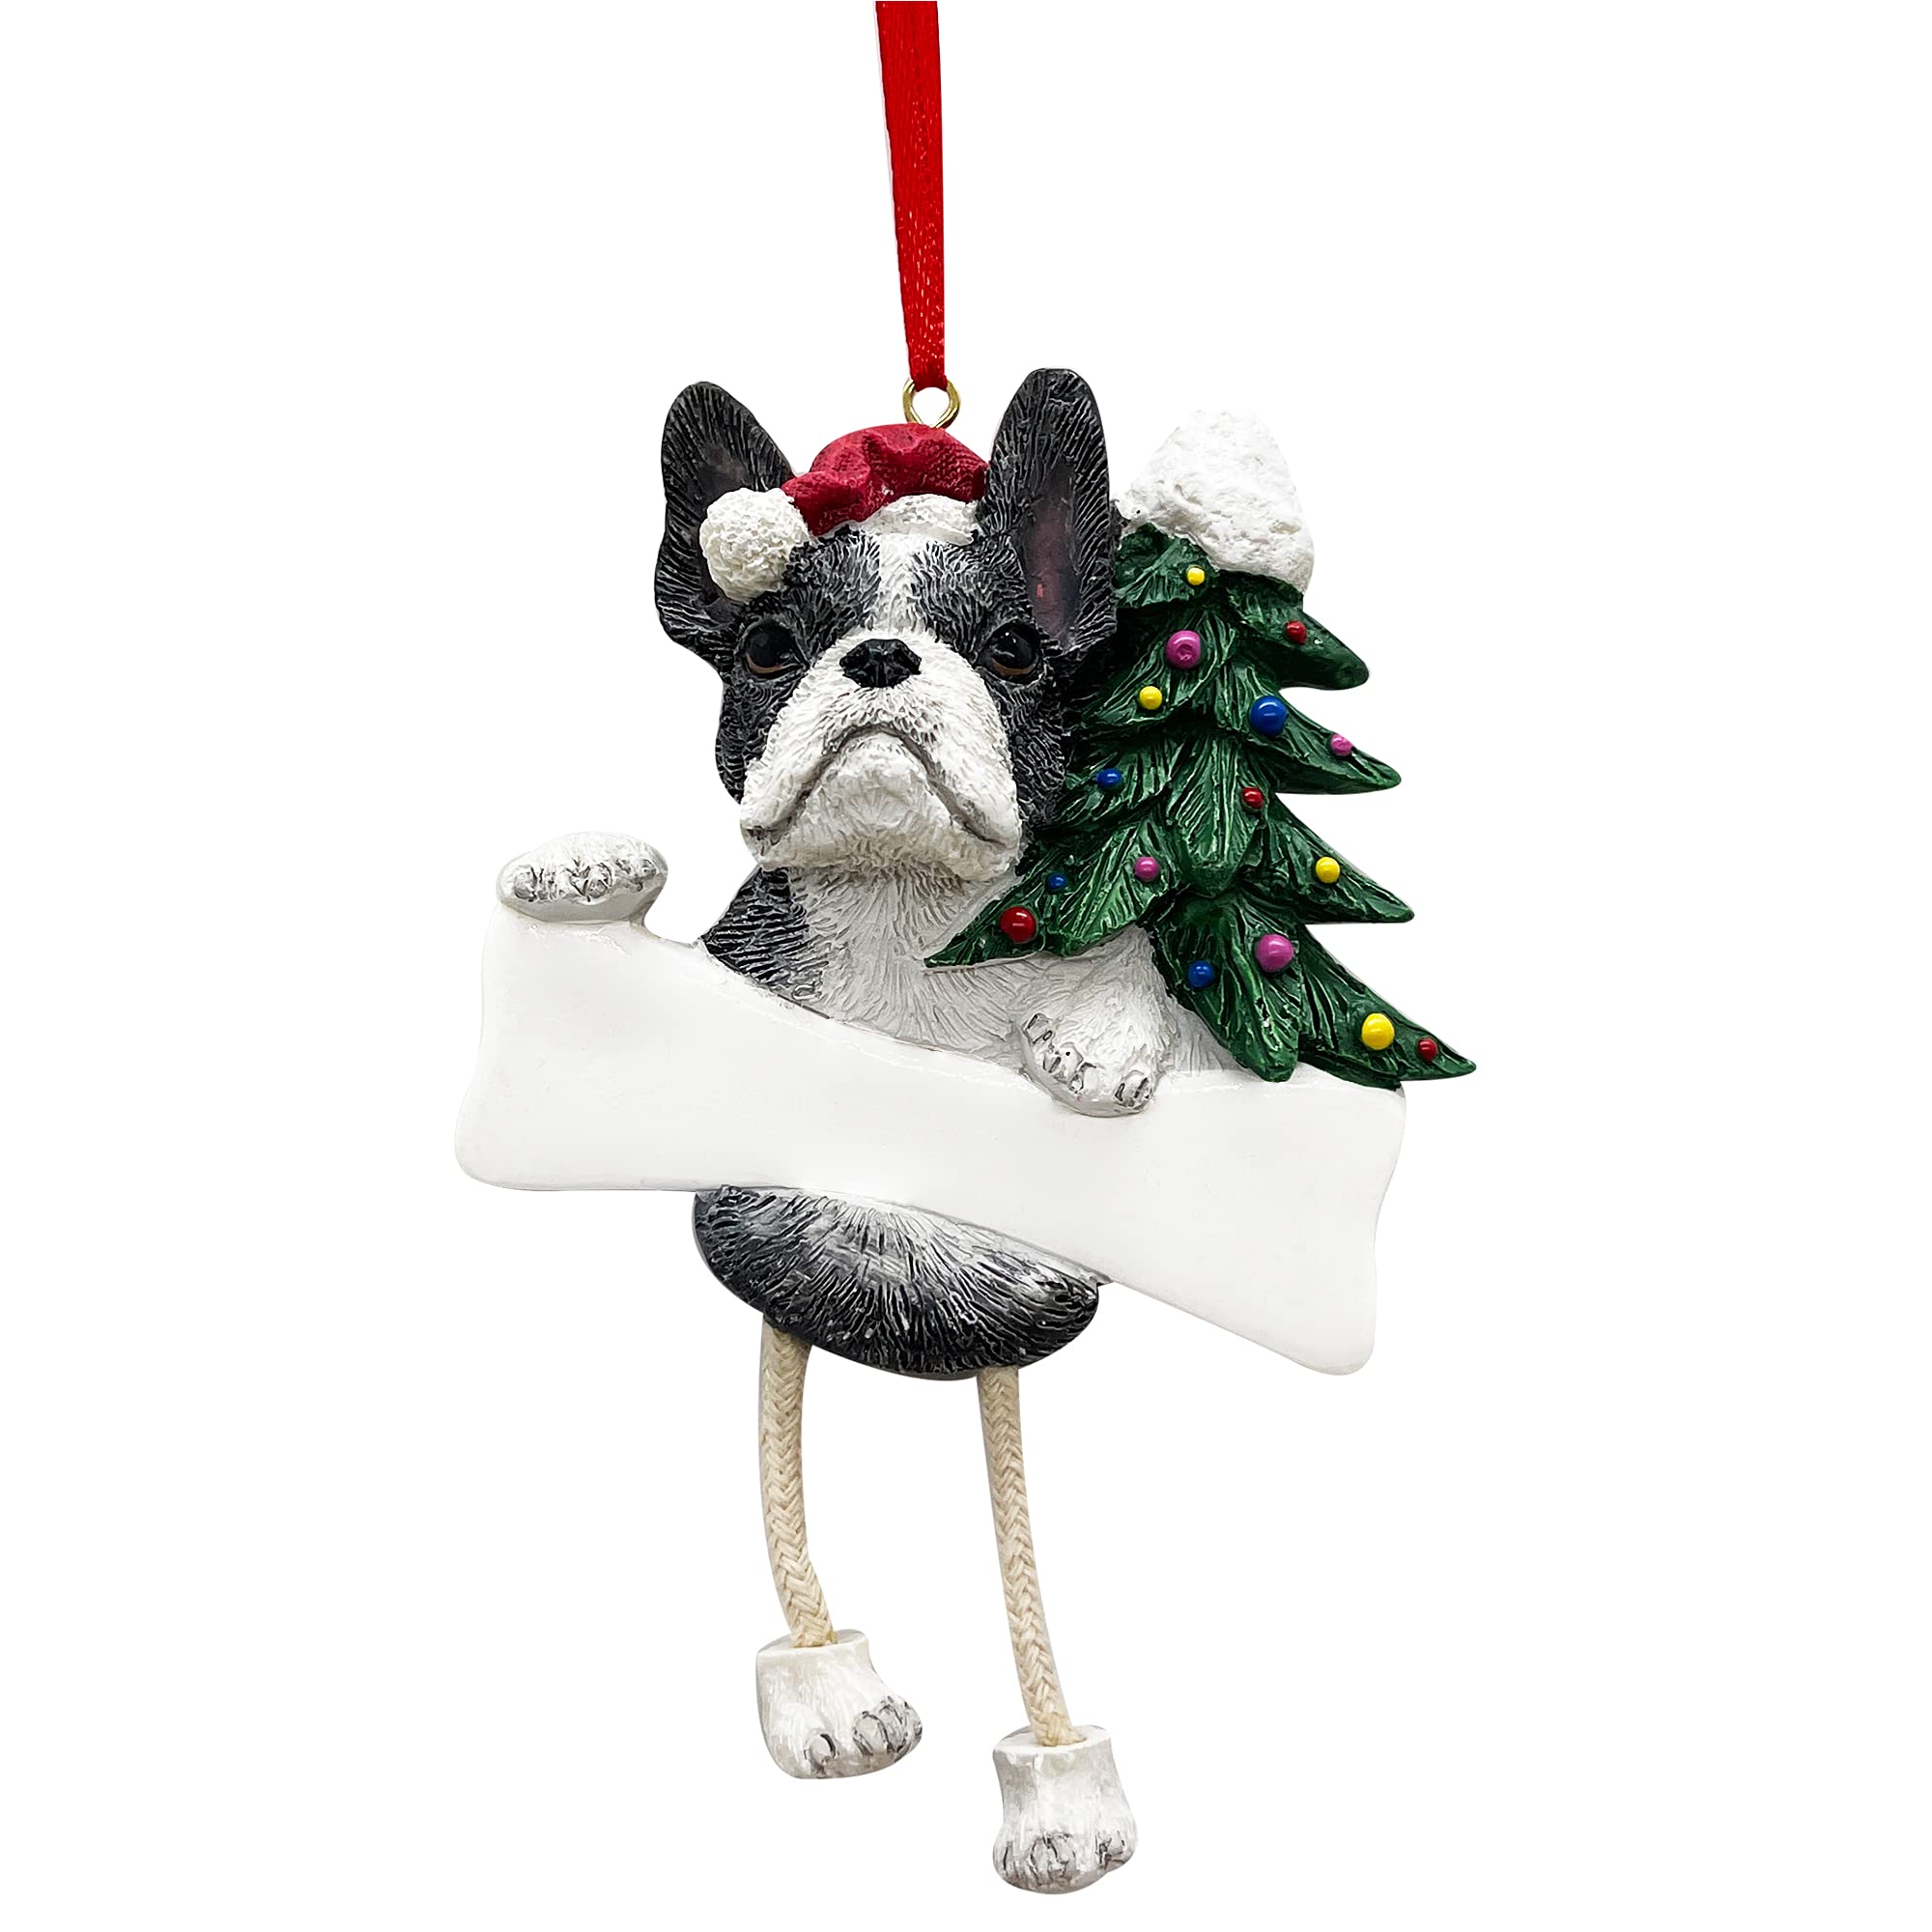 Boston Terrier Ornament with Unique "Dangling Legs" Hand Painted and Easily Personalized Christmas Ornament